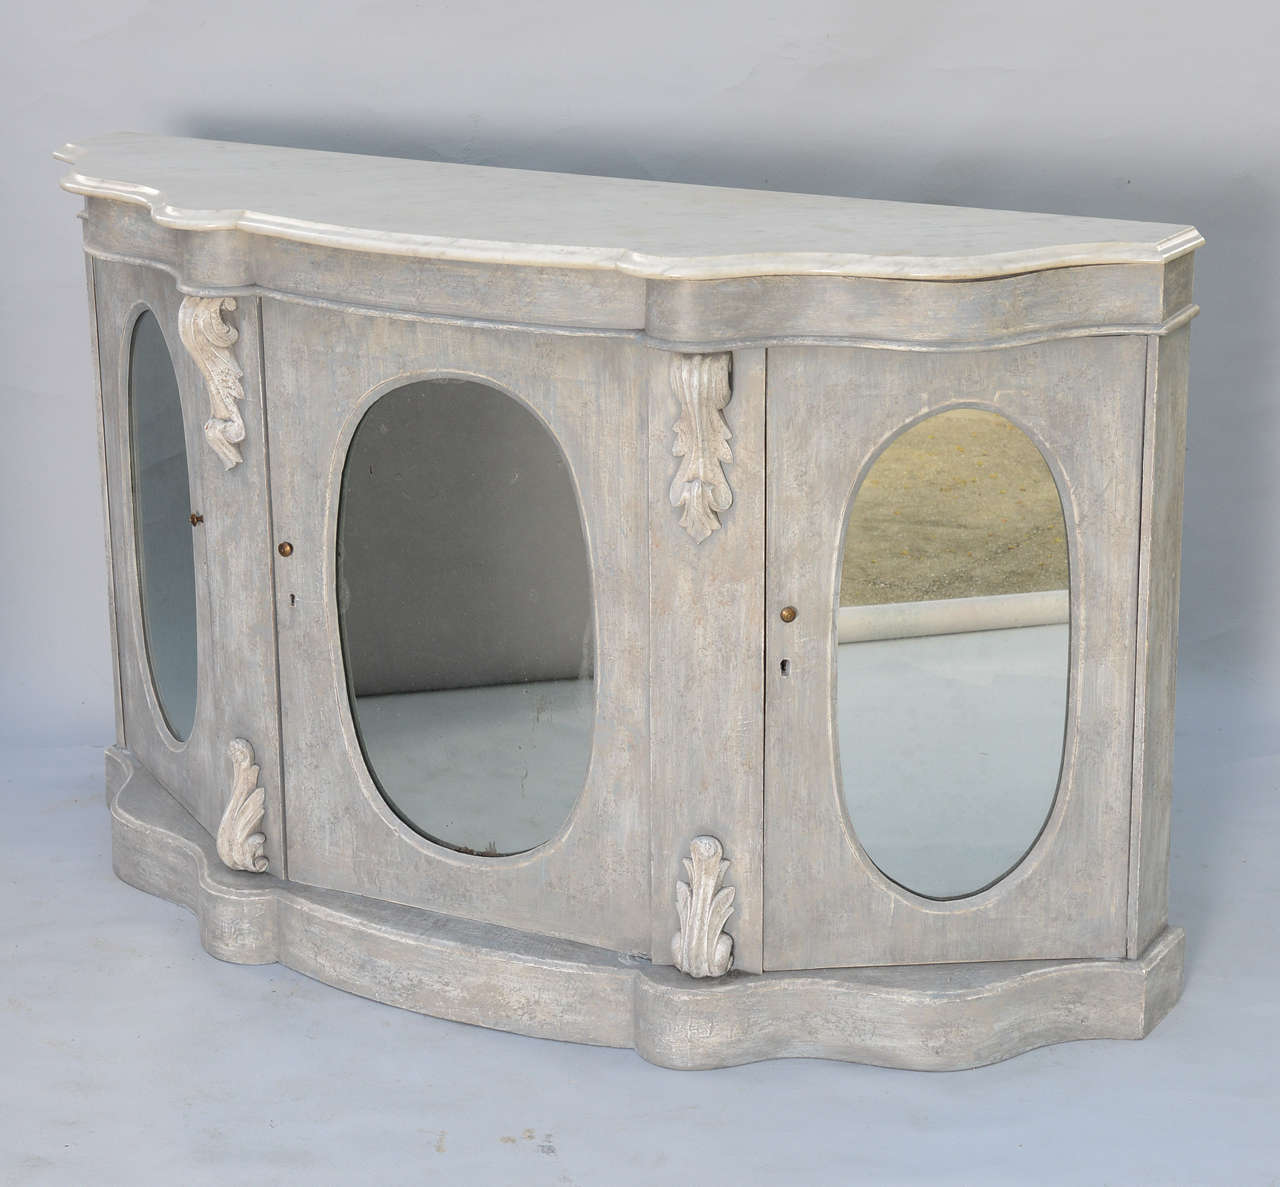 Buffet credenza or sideboard, with distressed painted finish, having a serpentine shape molded marble top, on conforming base with acanthus carved bracket details; its three cabinet doors each inset with oval mirror.